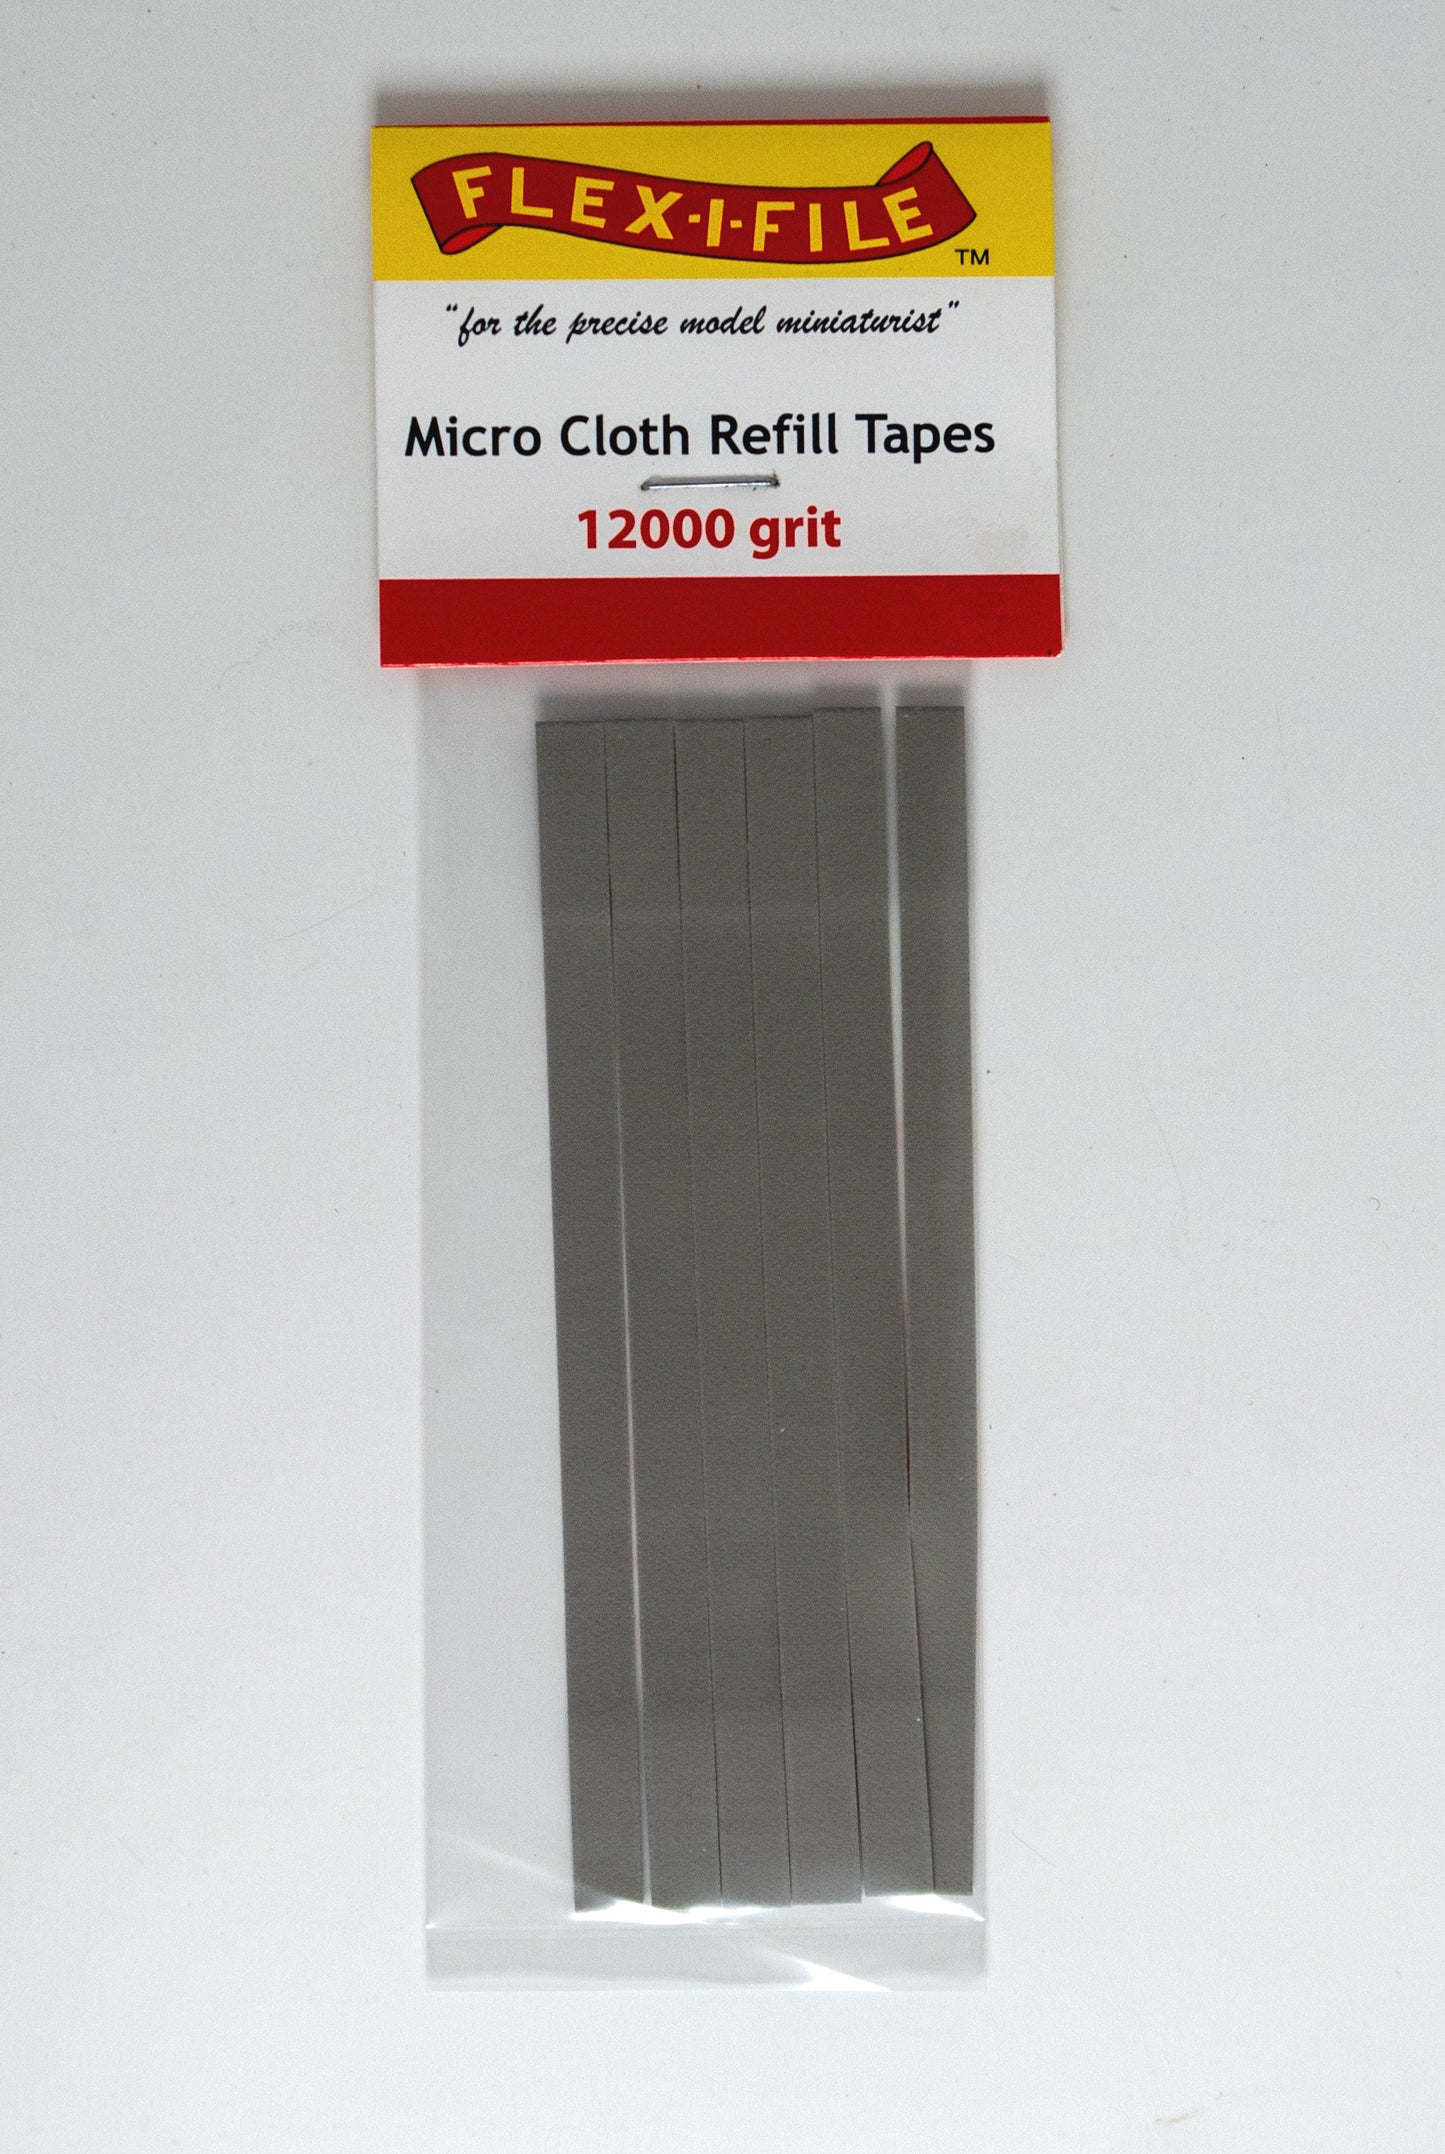 Micro Cloth Refill Tapes